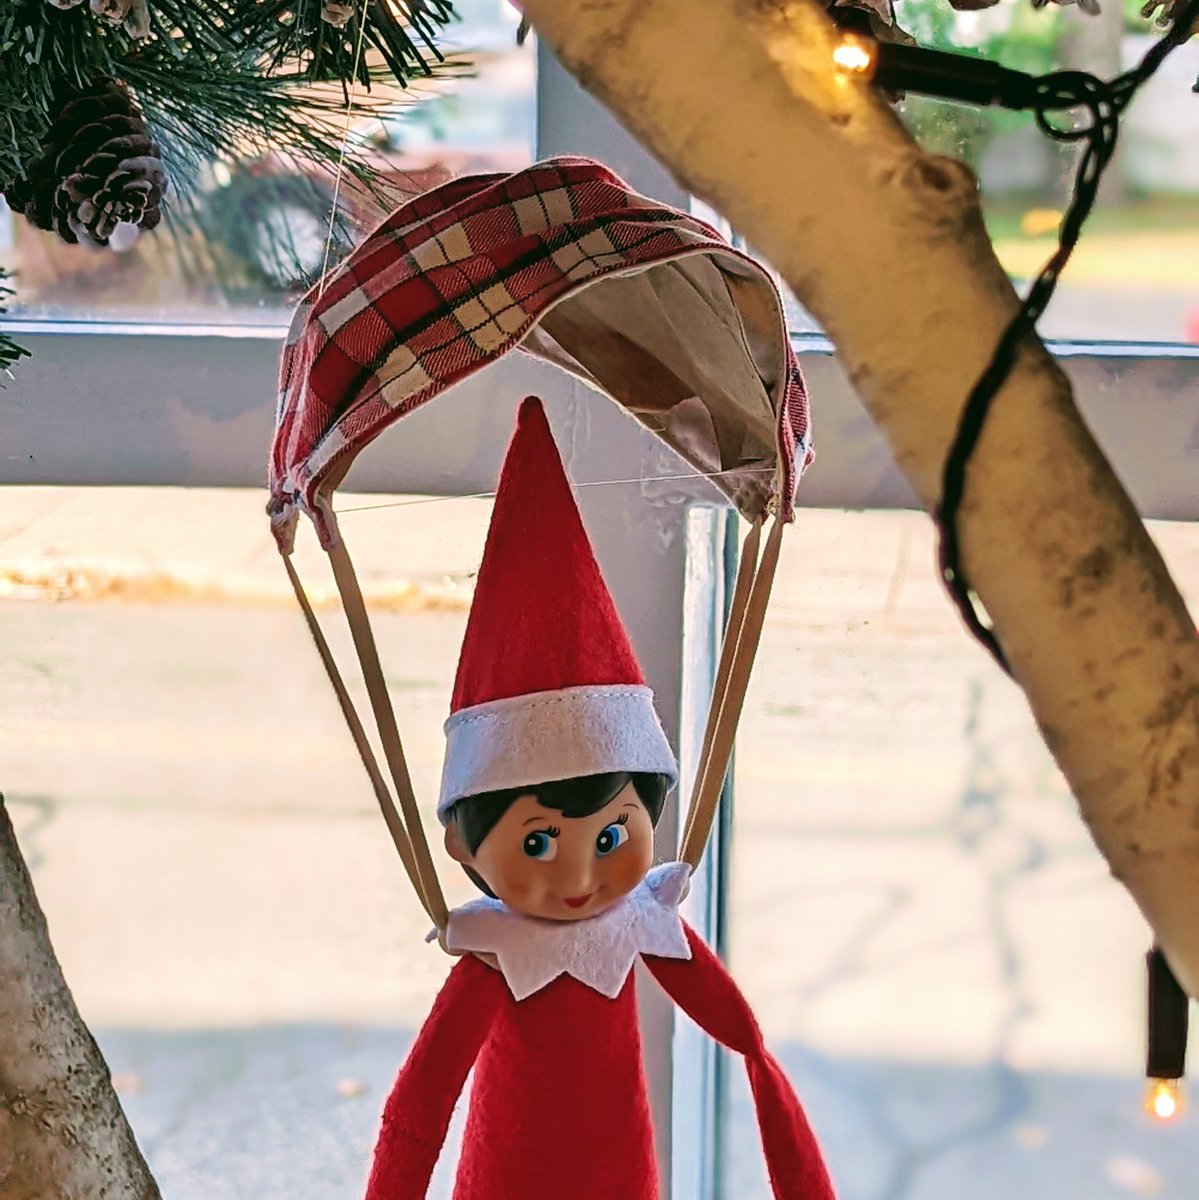 Peppermint arrived! Who knew that the handmade, all cotton face masks by @janettefilbert can also be used as elf parachutes? 🪂

#nutleyelfcrawl #elvesofnutley #clothfacemask